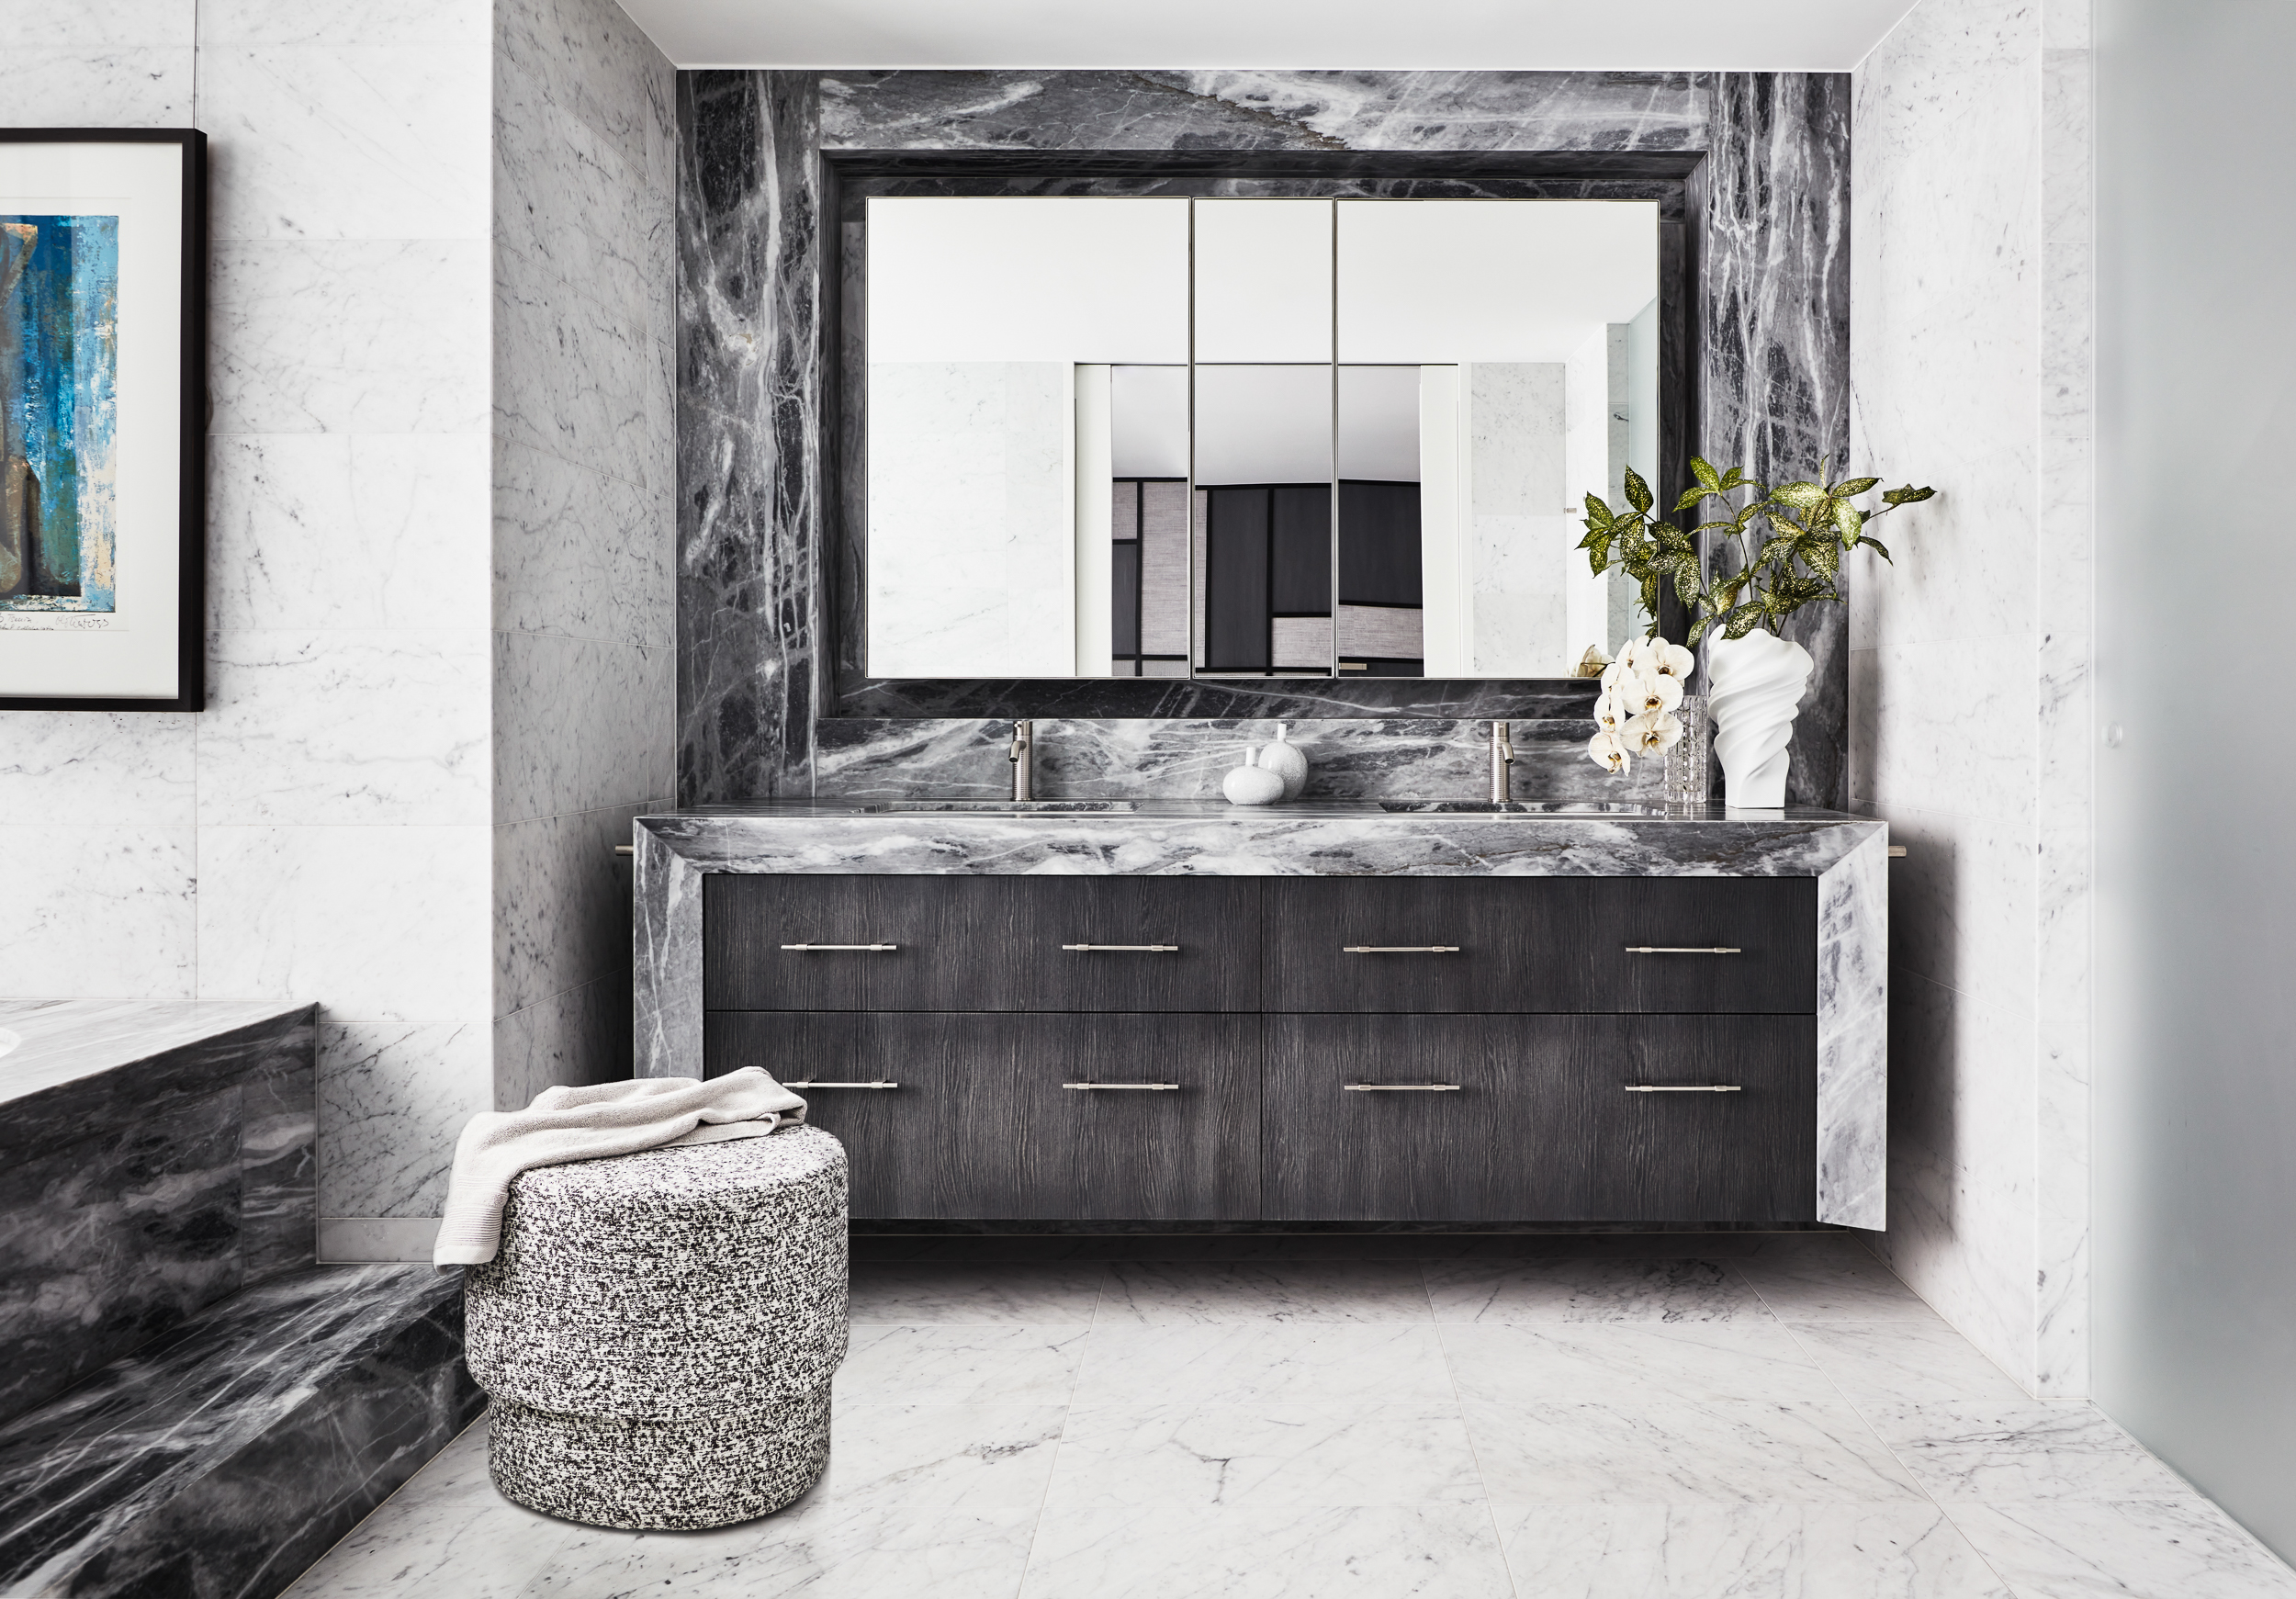 Master ensuite bathroom renovation with grey and white marble by Sydney interior designers, Brendan Wong Design